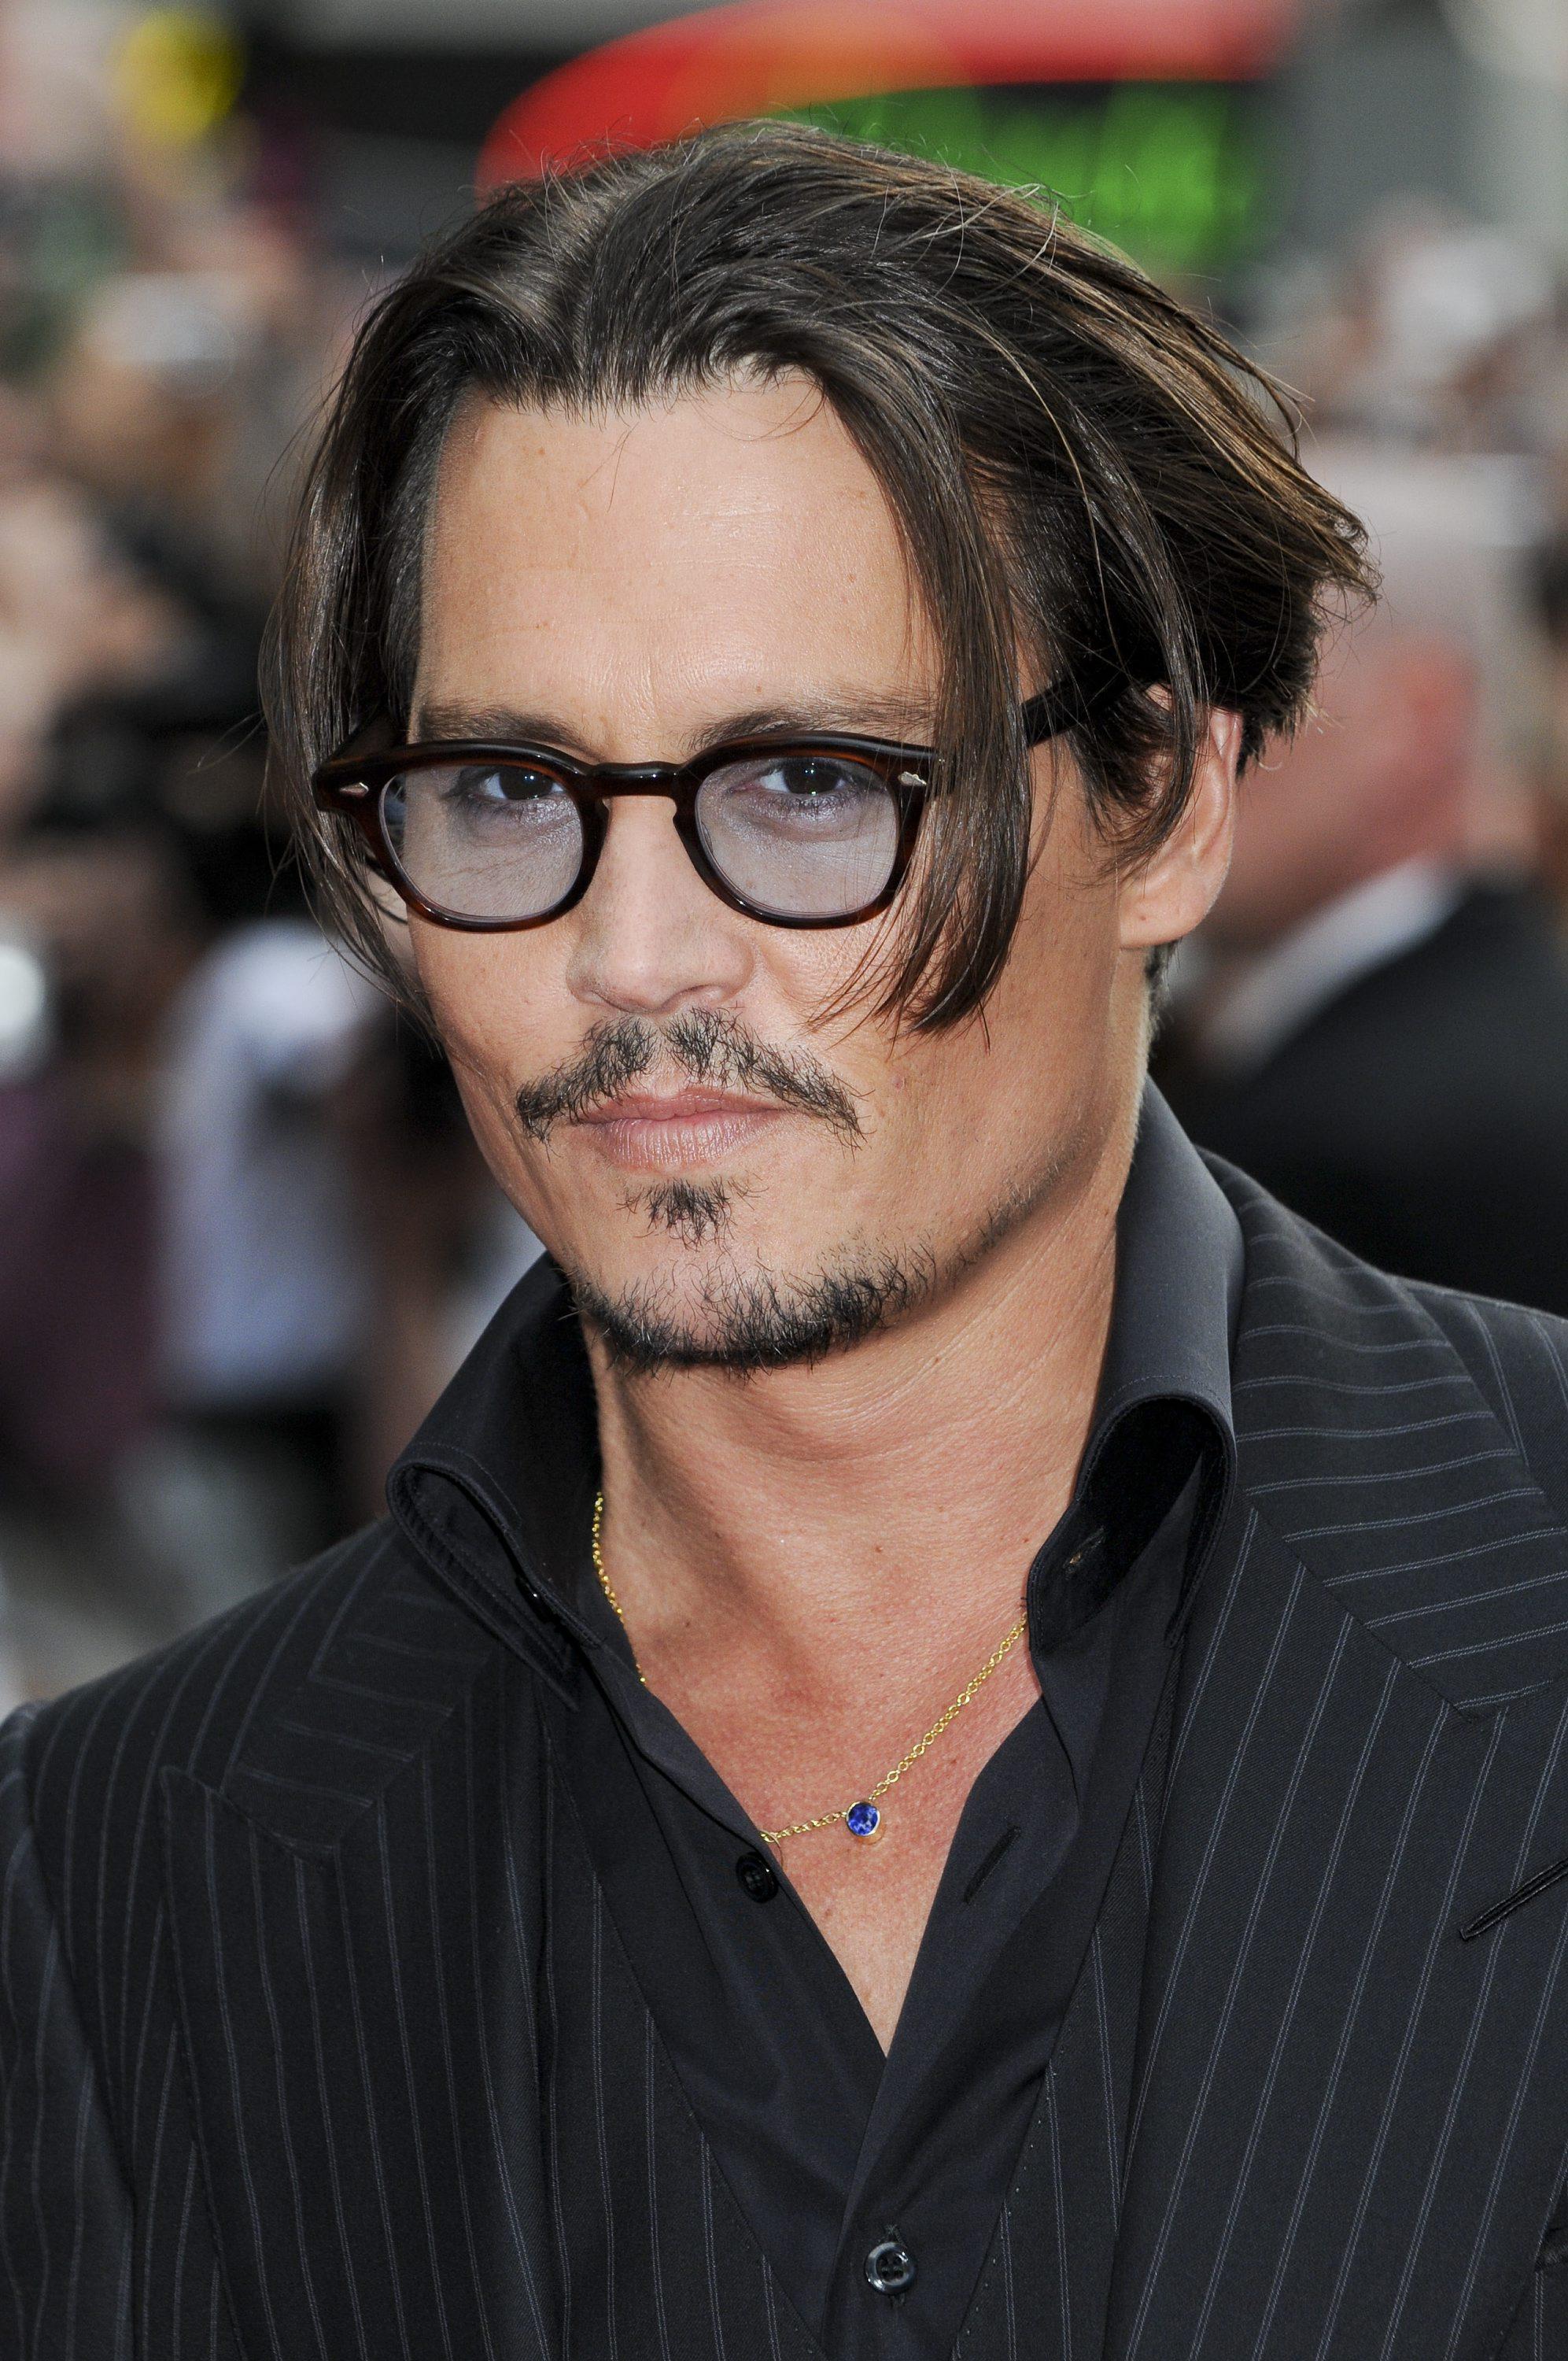 Pictures of Johnny Depp - Pictures Of Celebrities